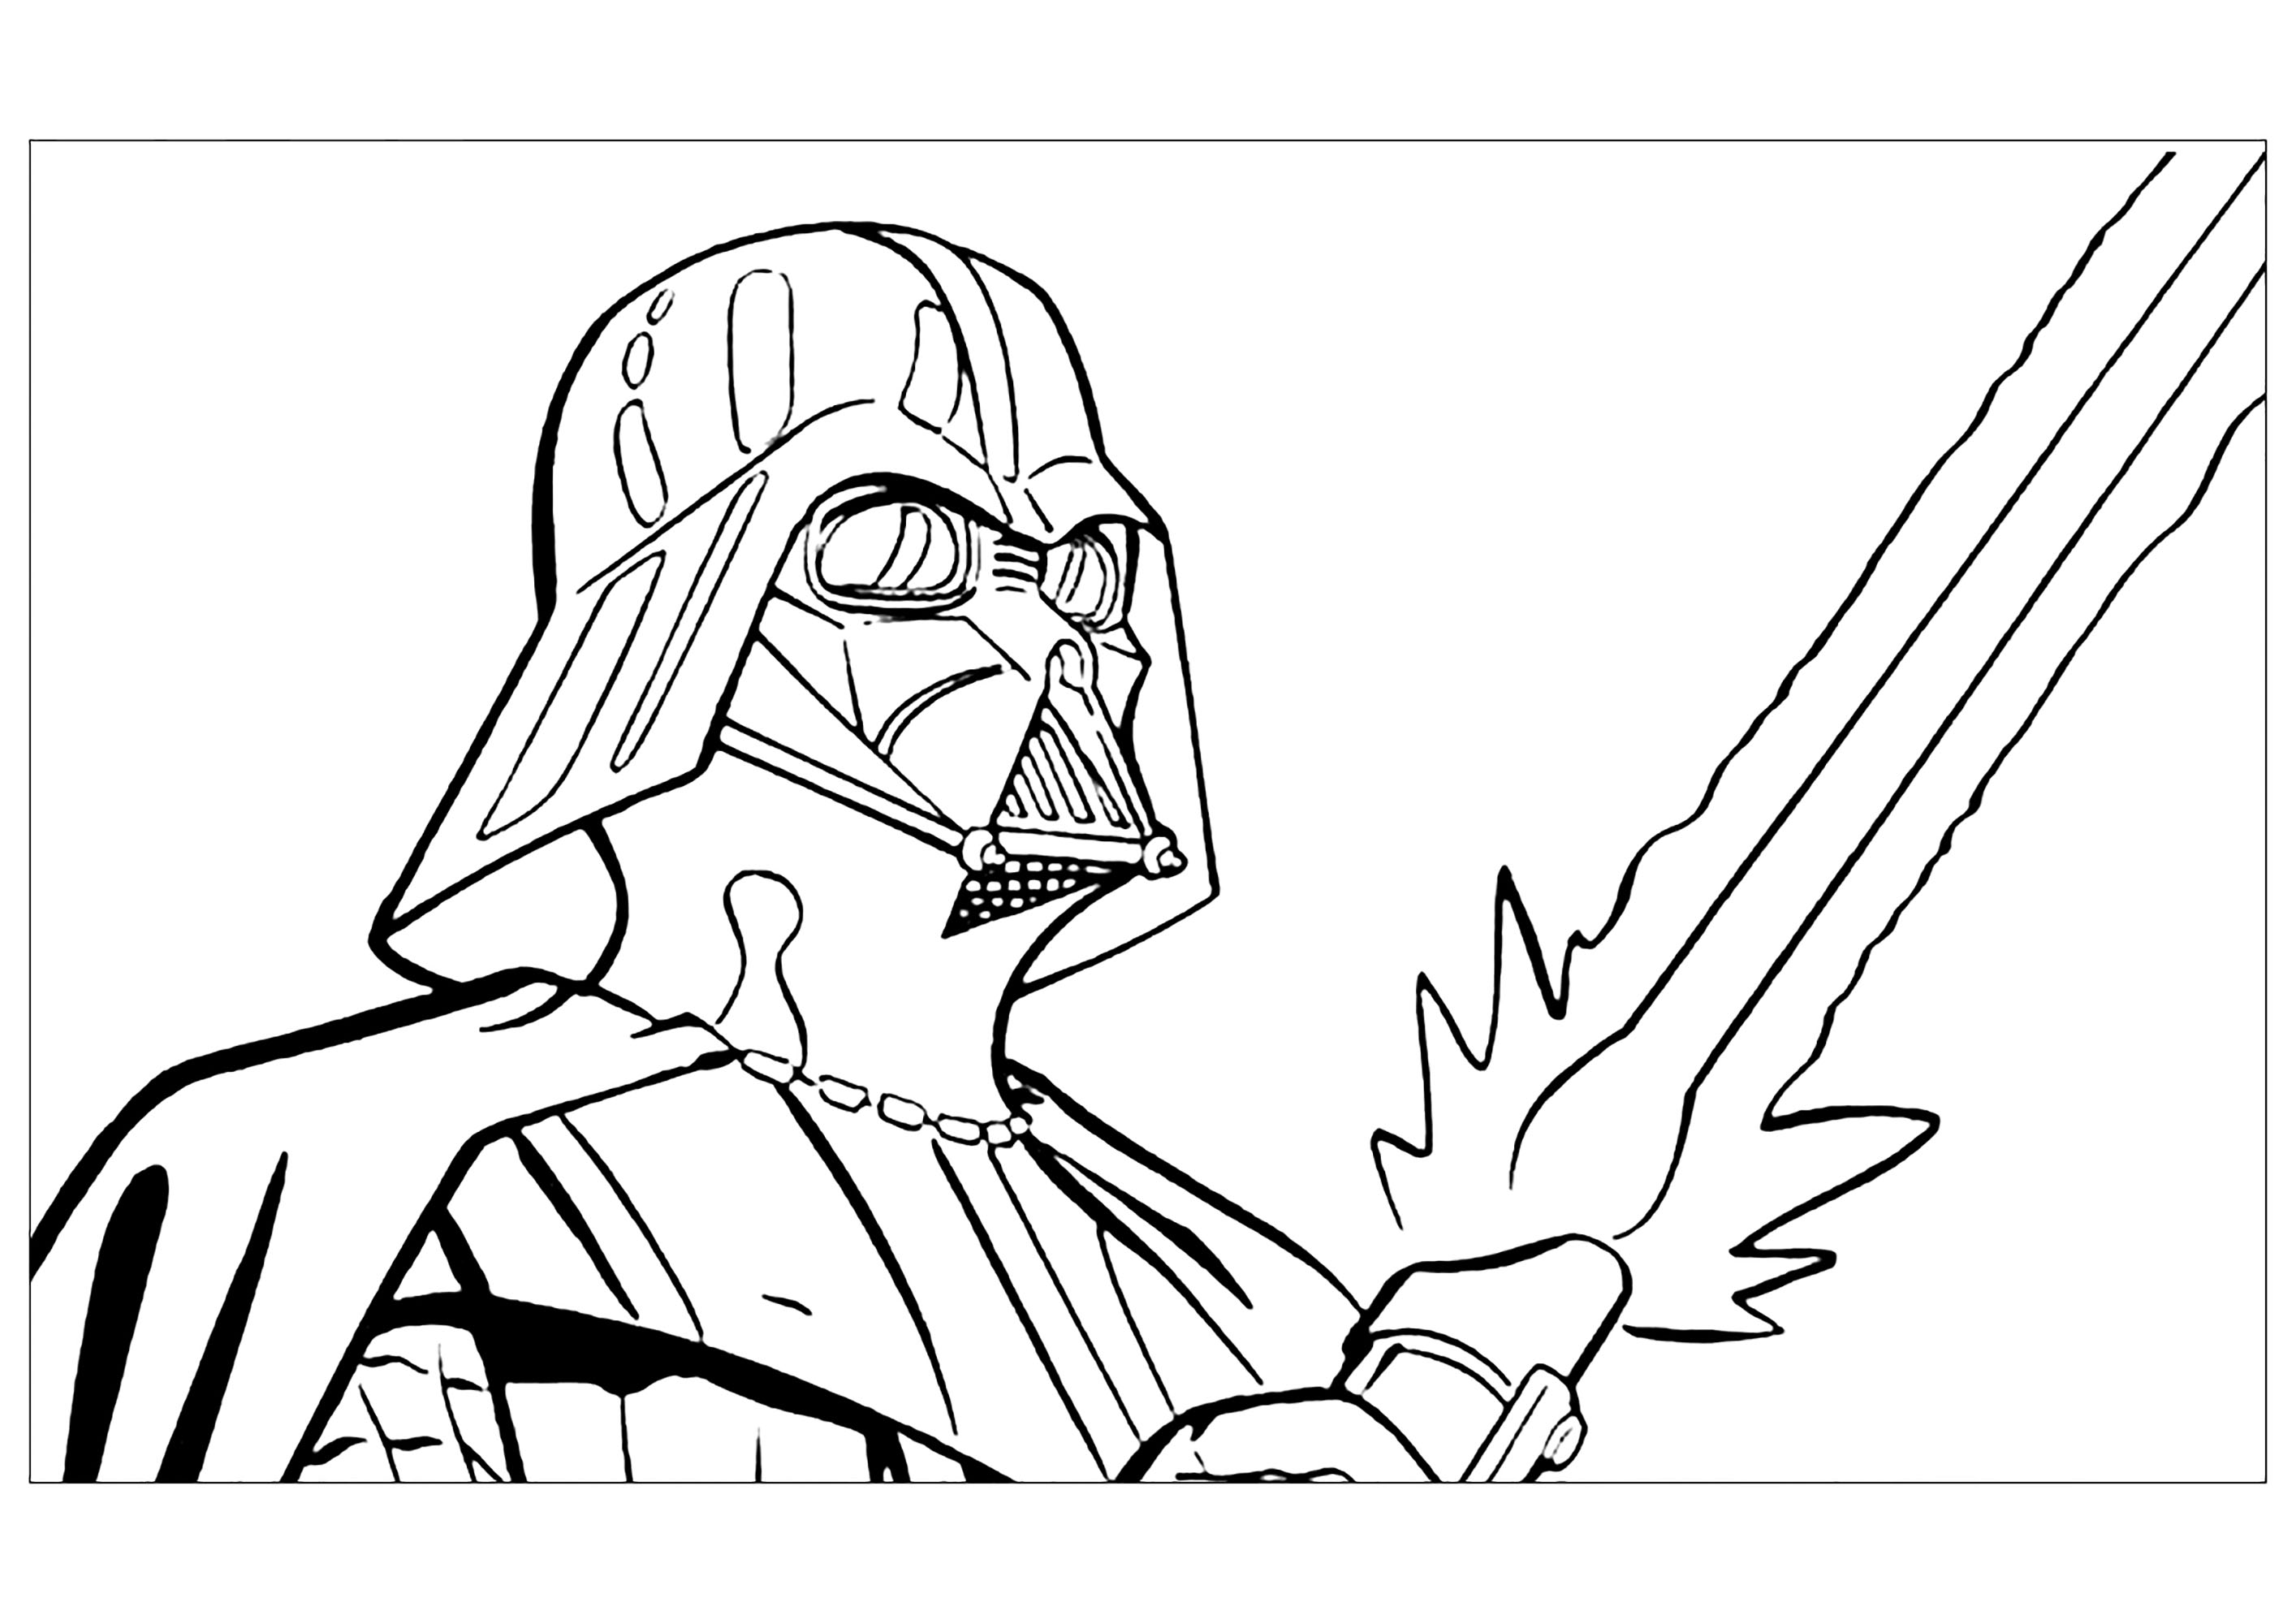 Color the Sith Lord Darth Vader ... formerly Anakin Skywalker